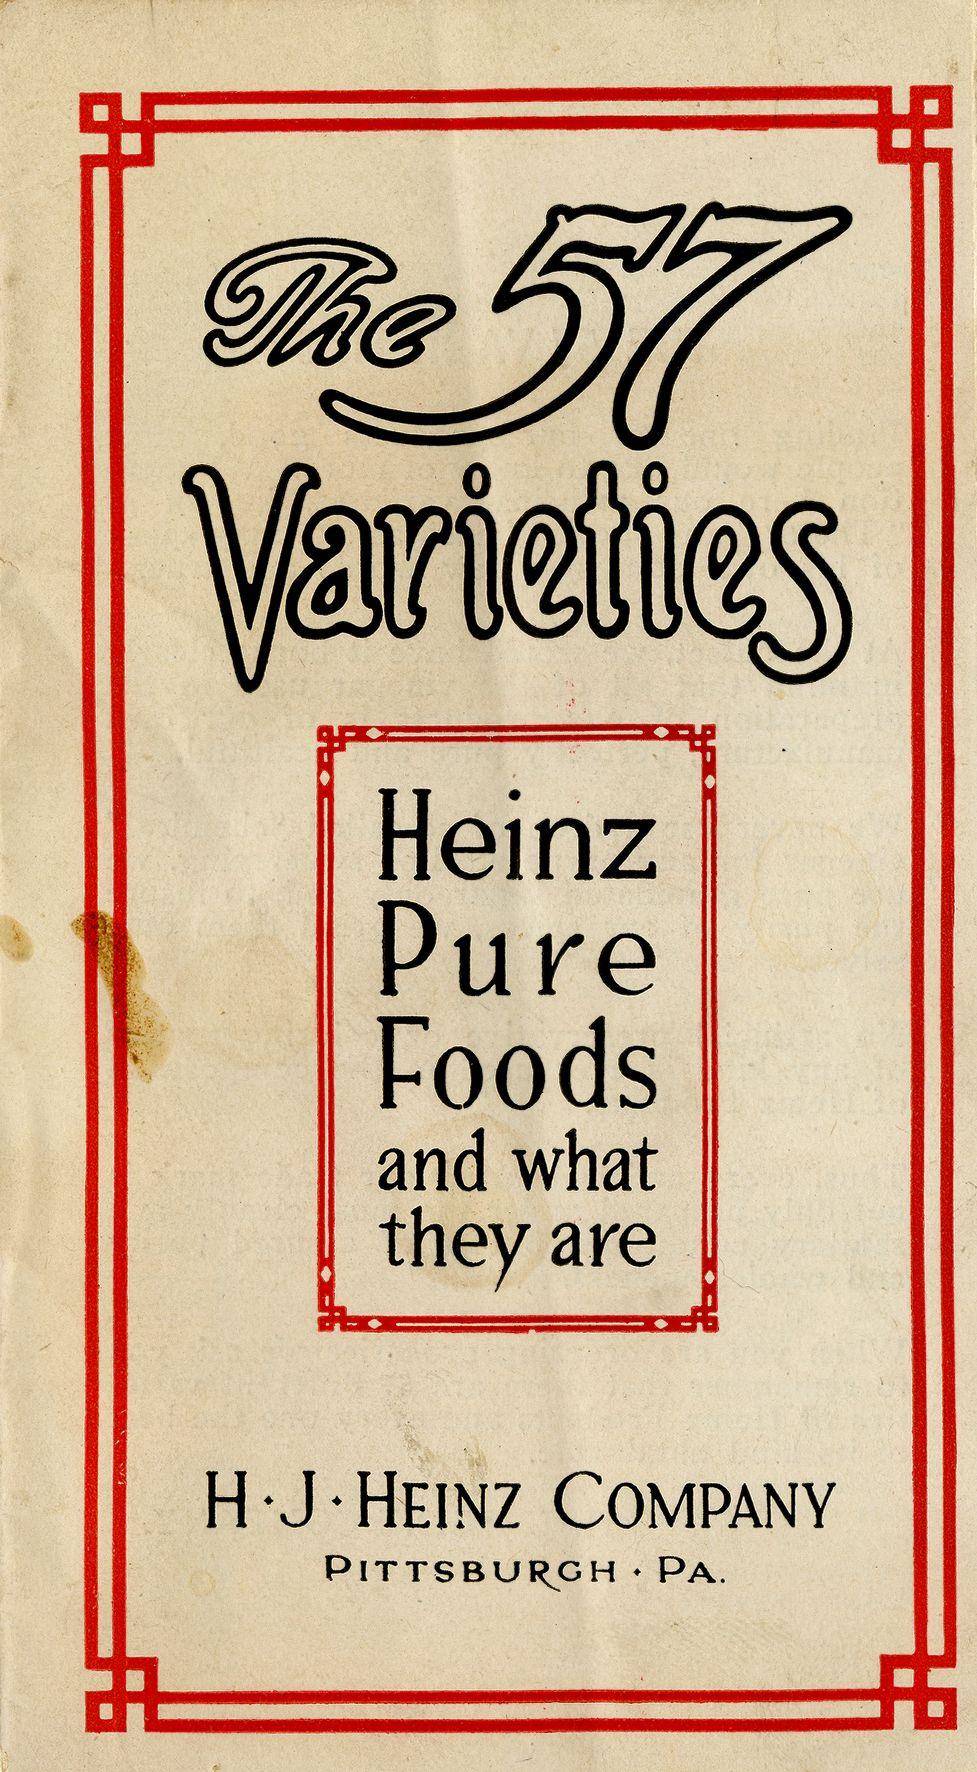 Heinz Pure Foods and what they